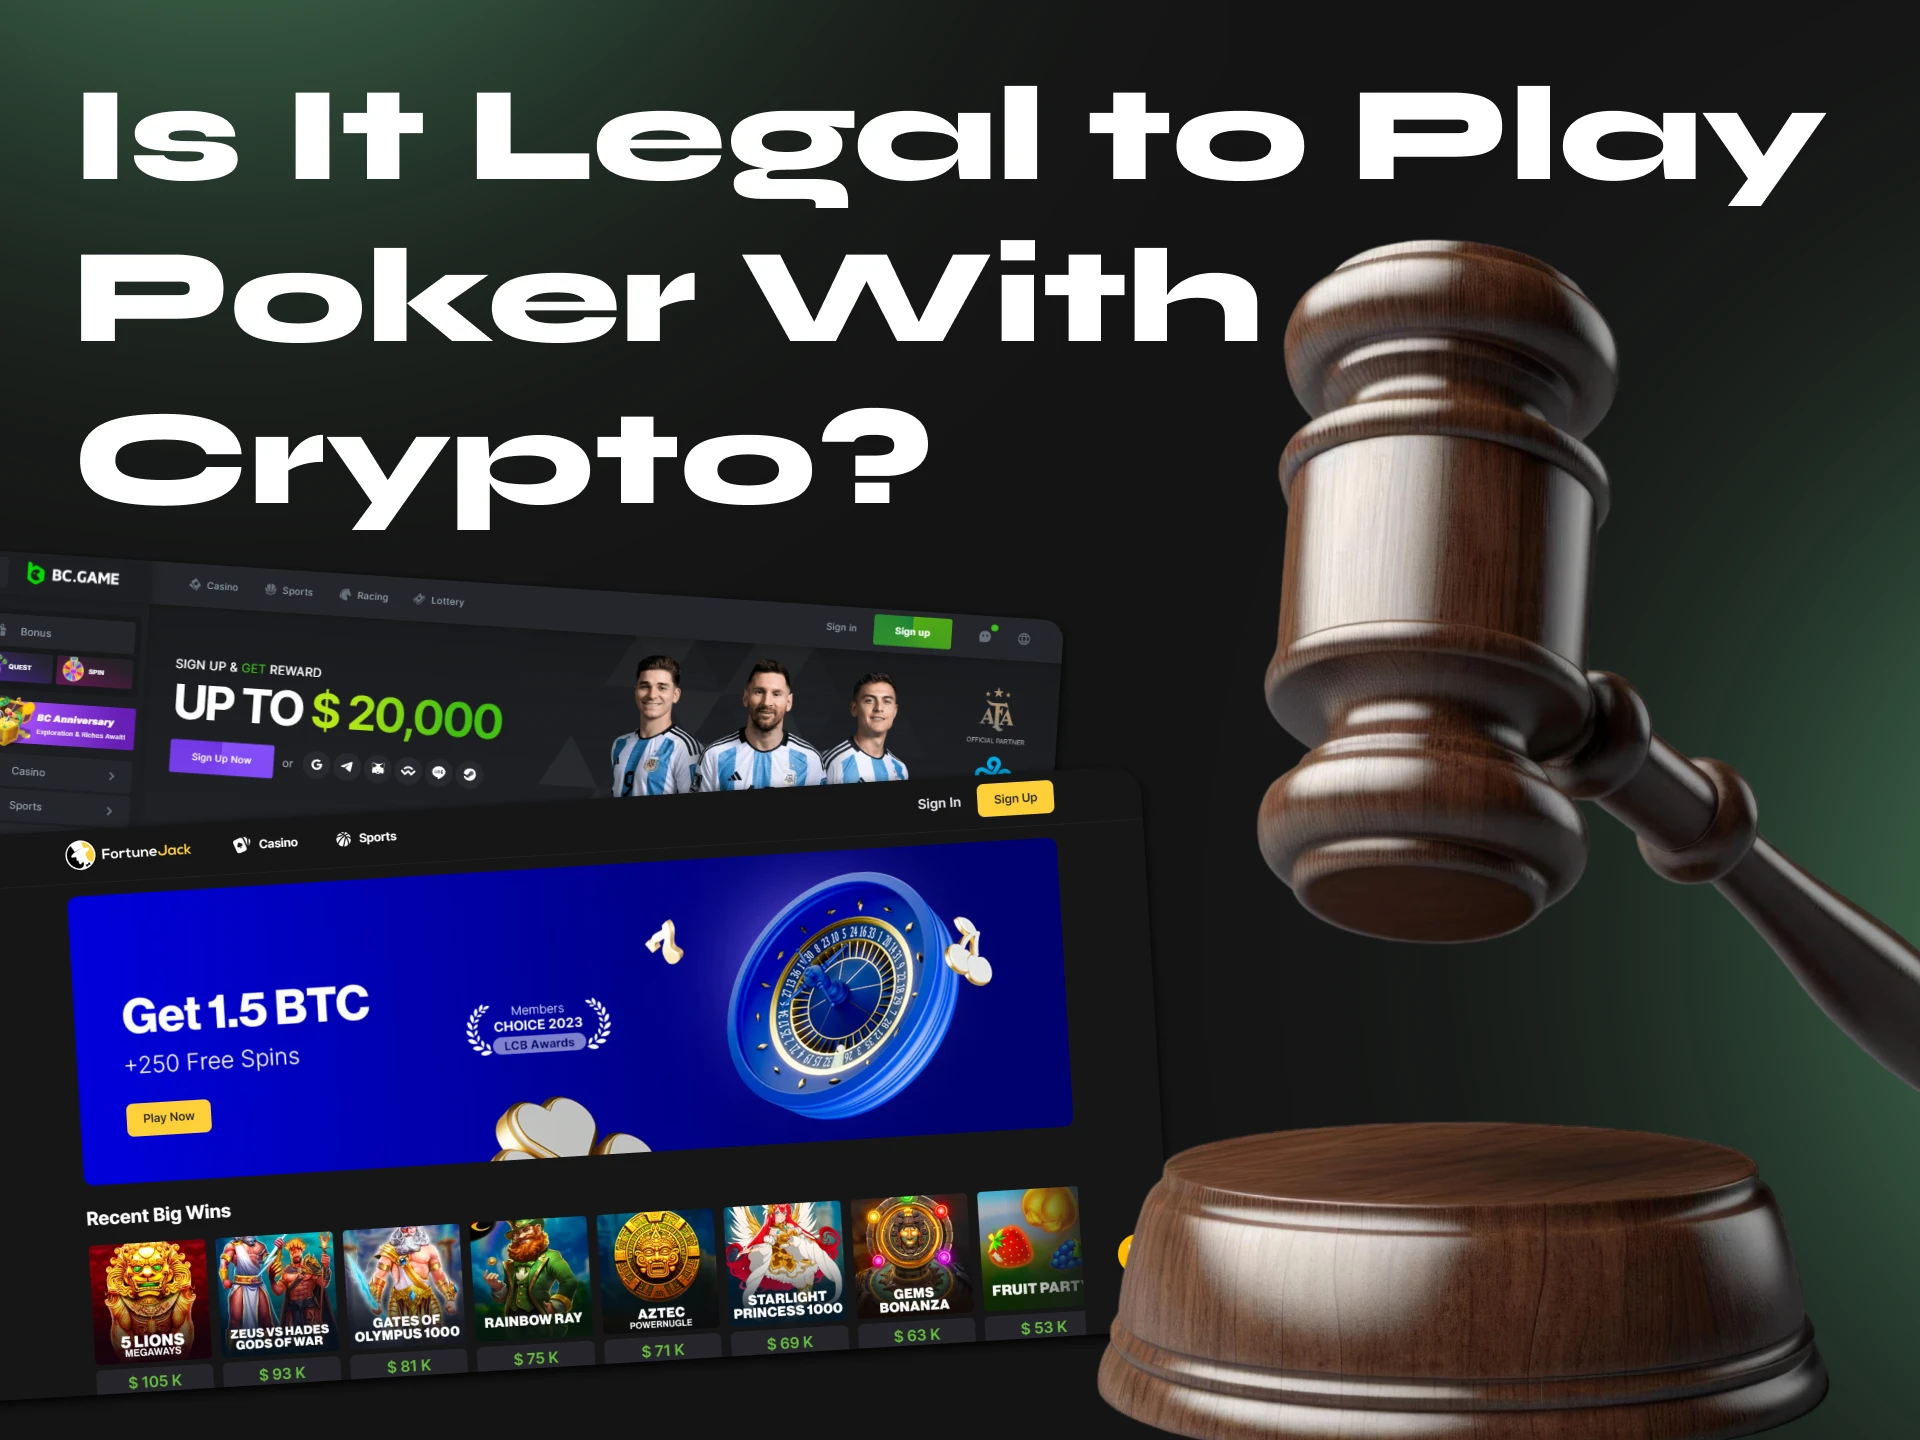 Playing poker using cryptocurrency is completely legal and safe.